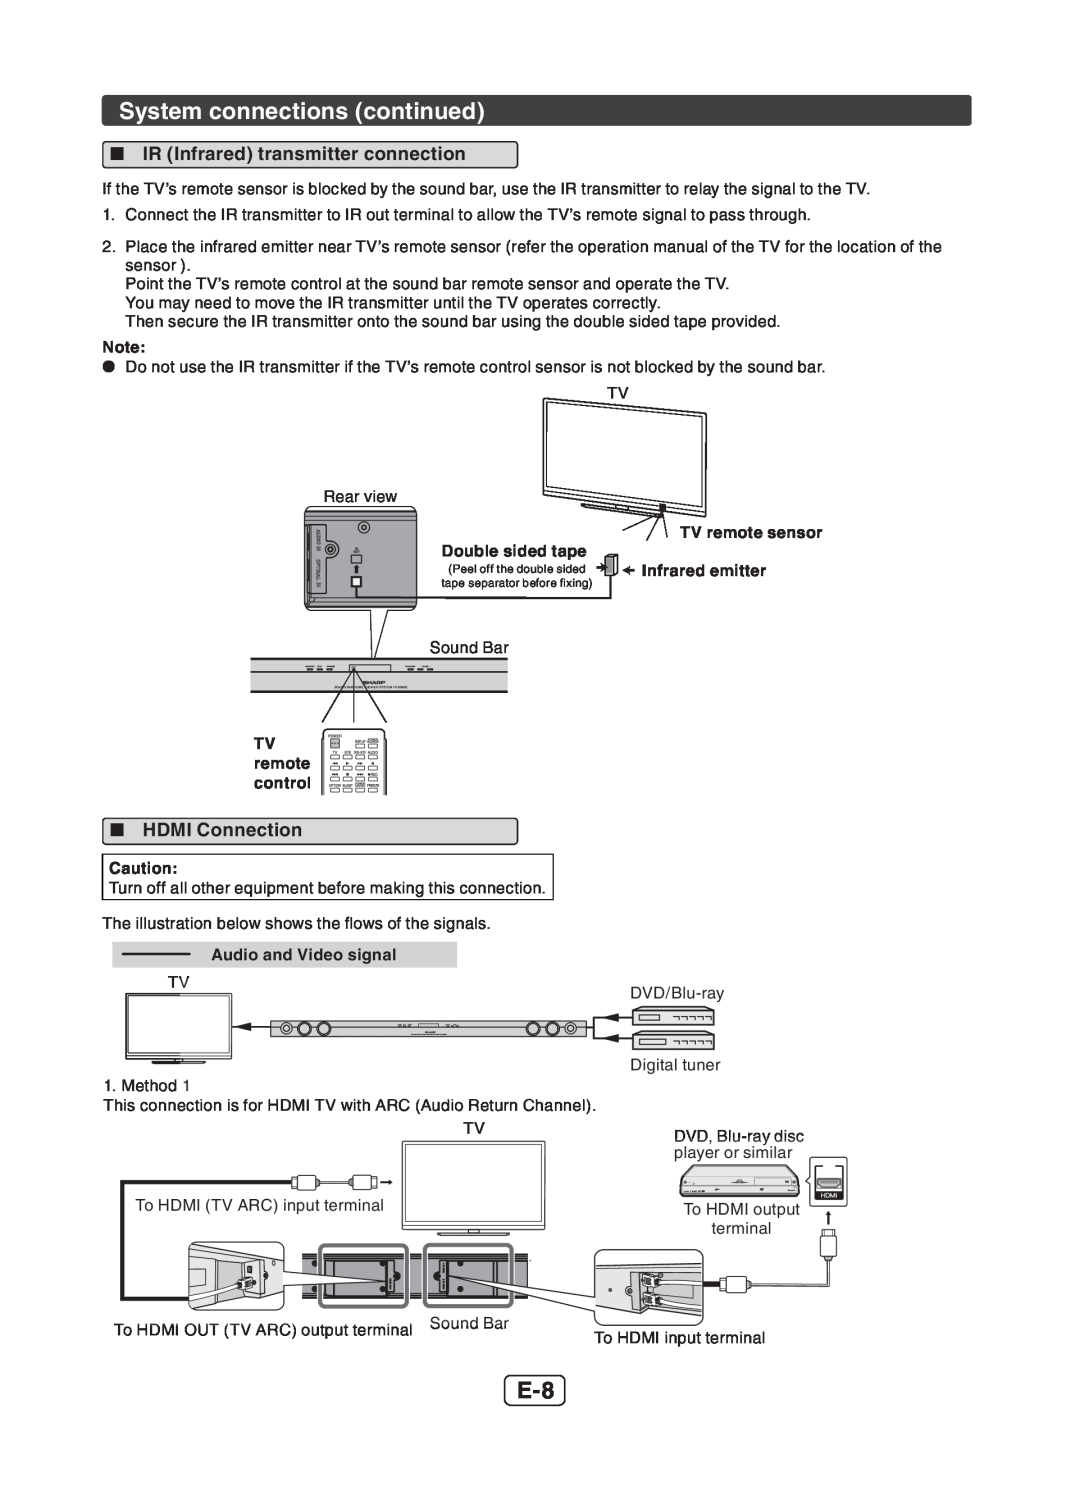 Sharp HT-SB602 operation manual System connections continued 